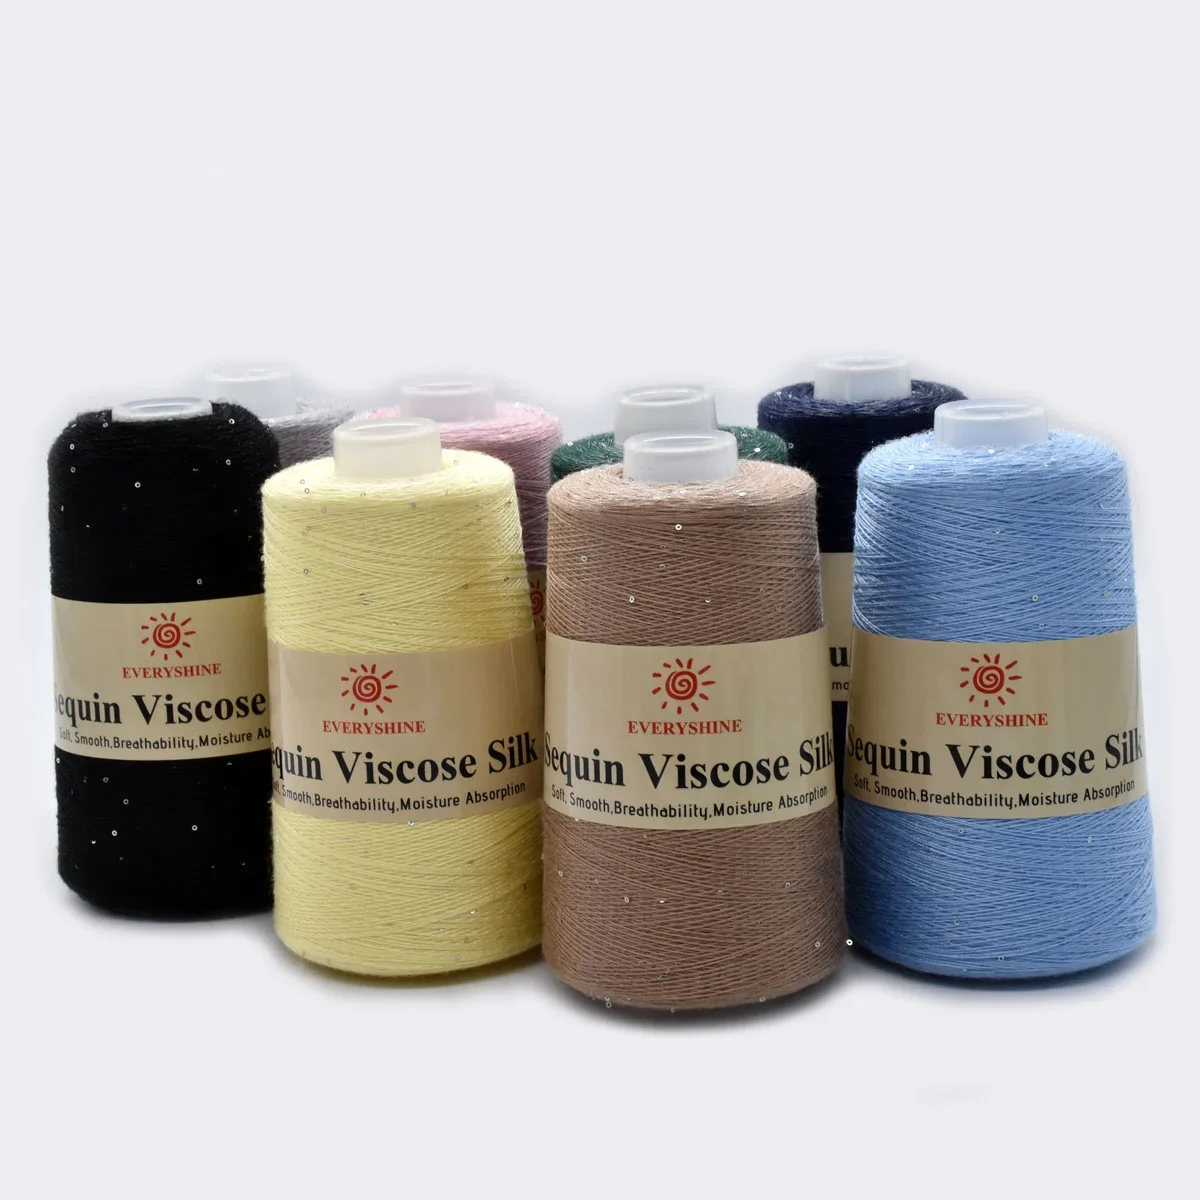 Shiny Sequin Sequin Yarn For Knitting 100gIce Silk Mercerized Wool Thin  Thread Hand Needlework Line Y211129 From Mengqiqi05, $7.6